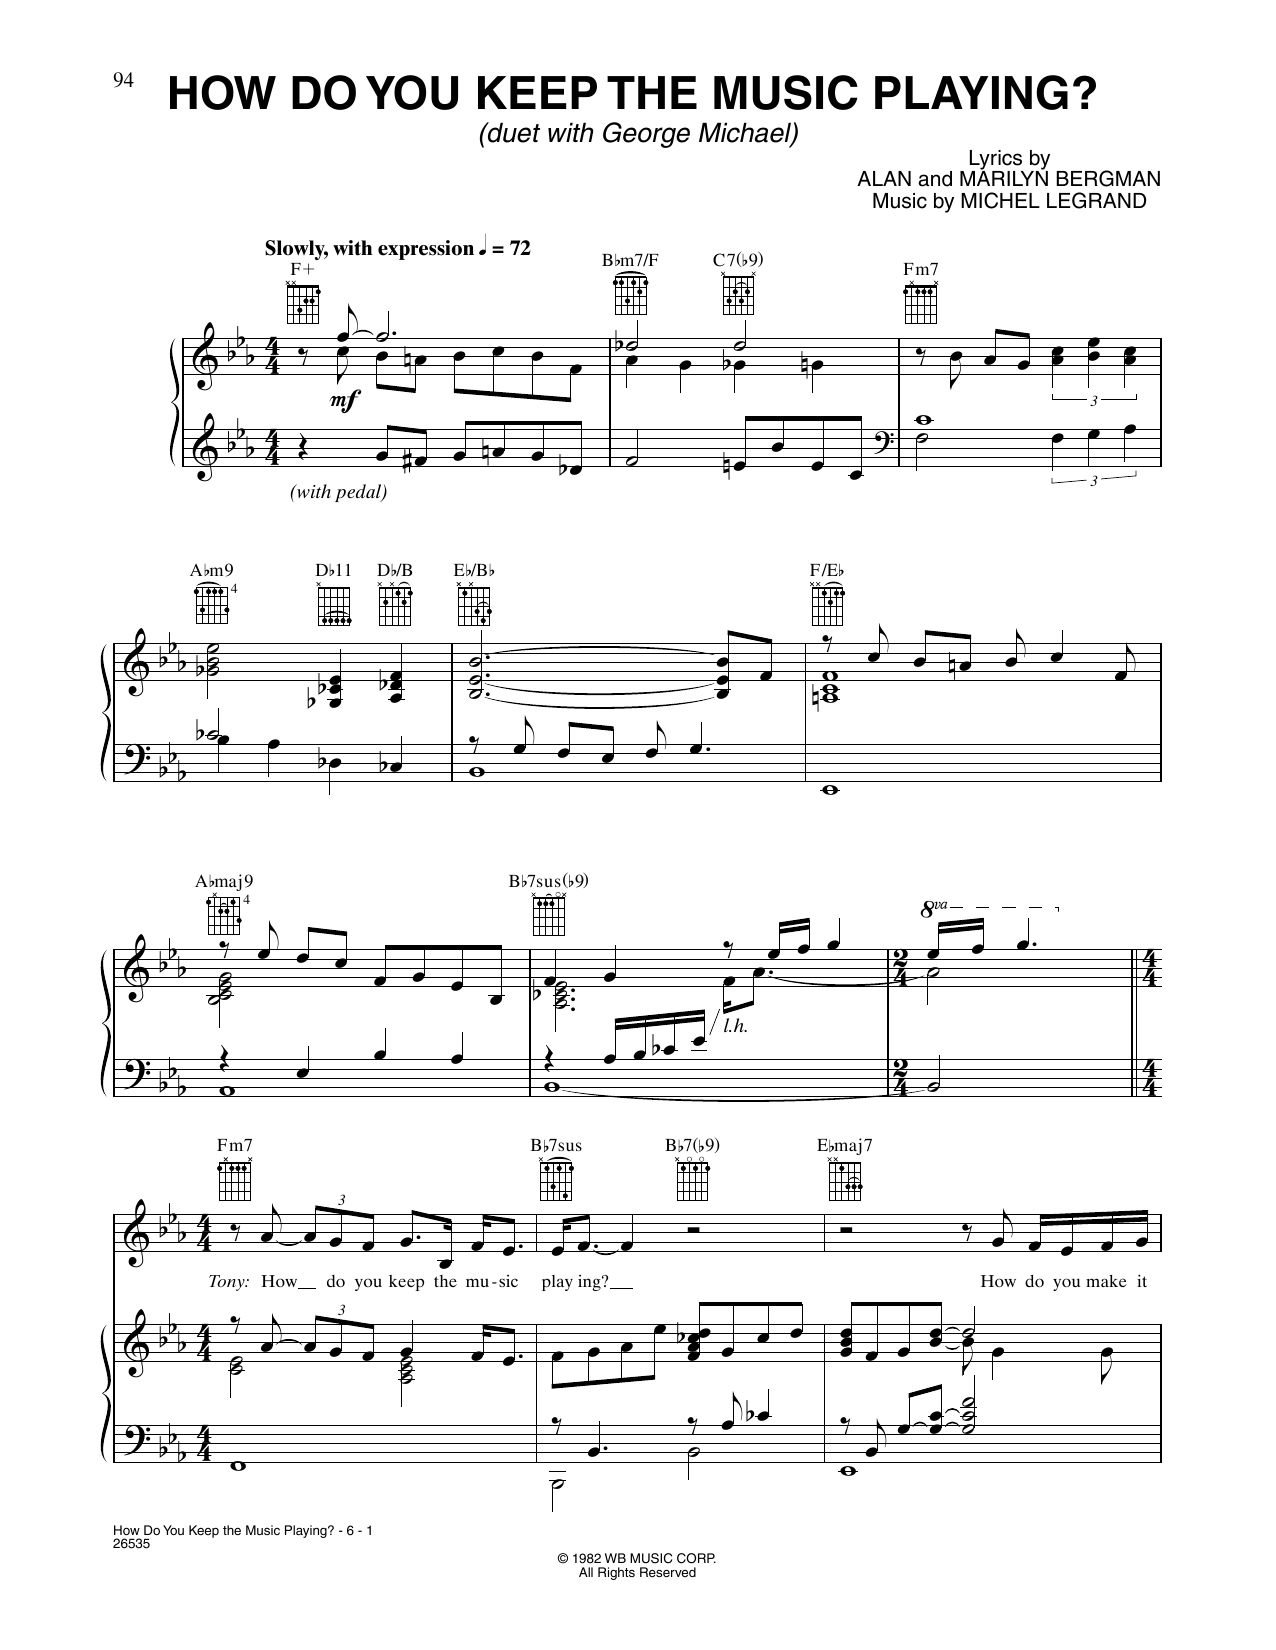 Download CÉLINE DION How Do You Keep The Music Playing? Sheet Music